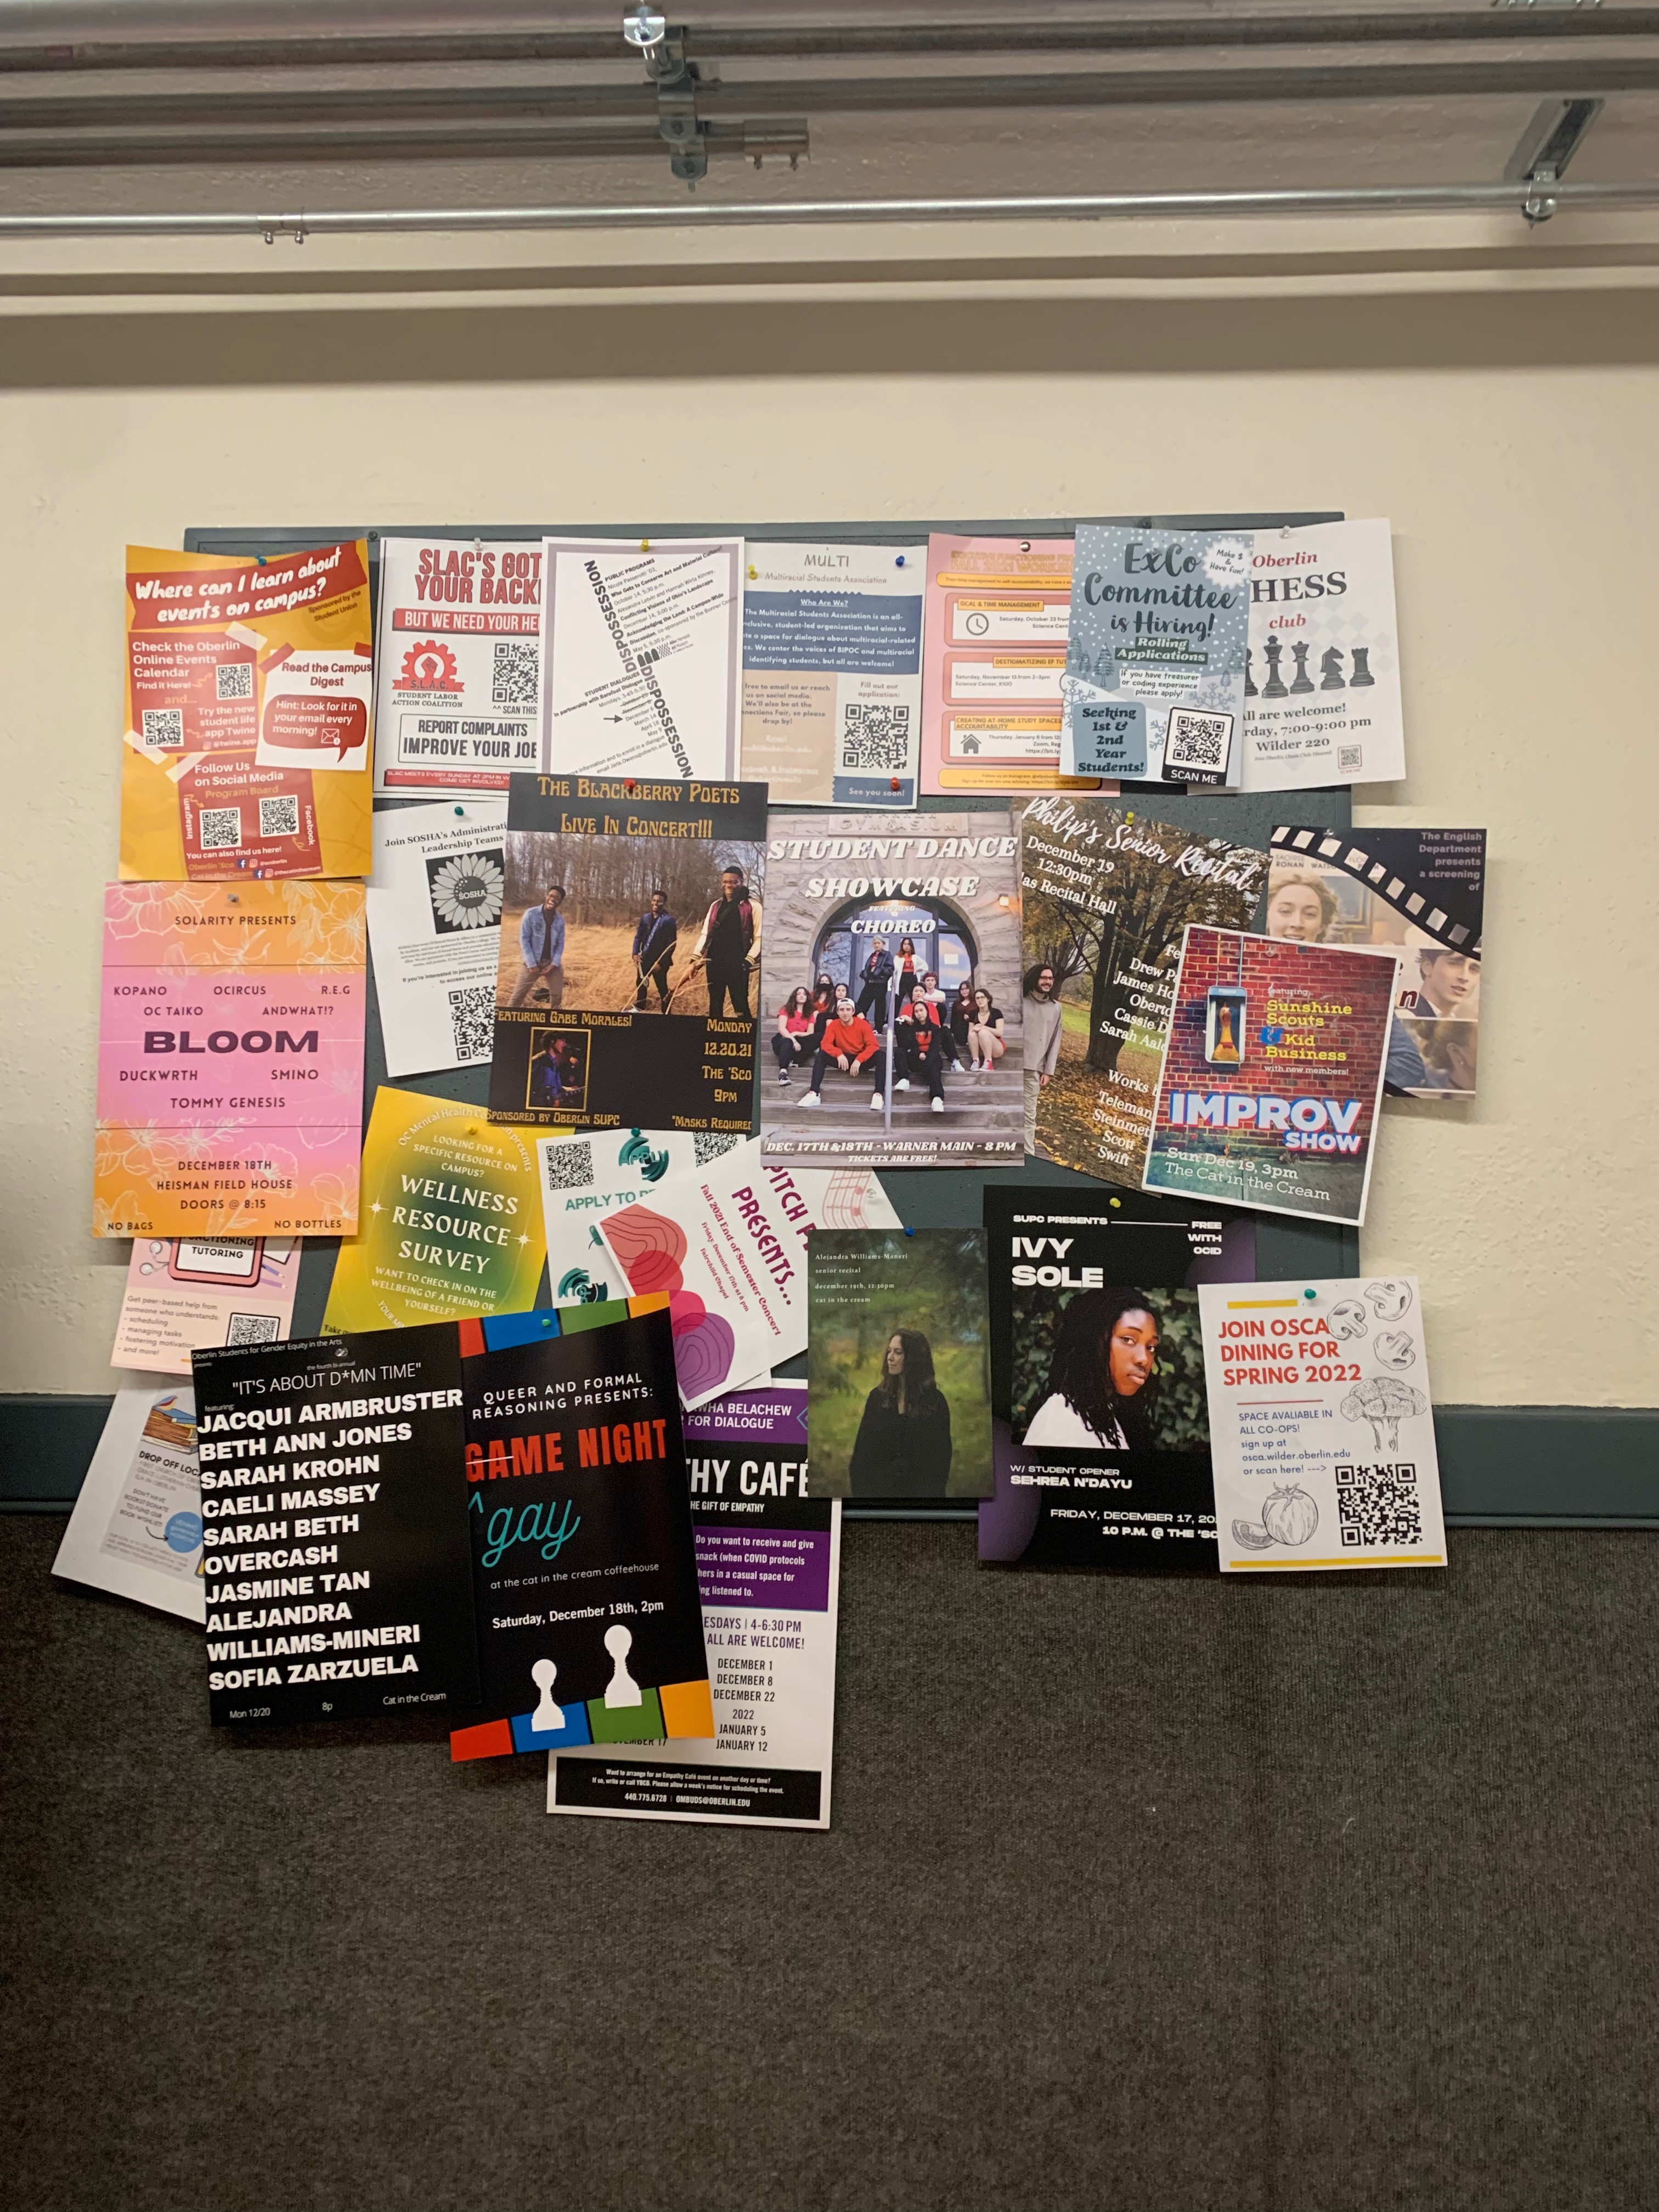 posters in Wilder, the student union, advertise all the events happening that weekend